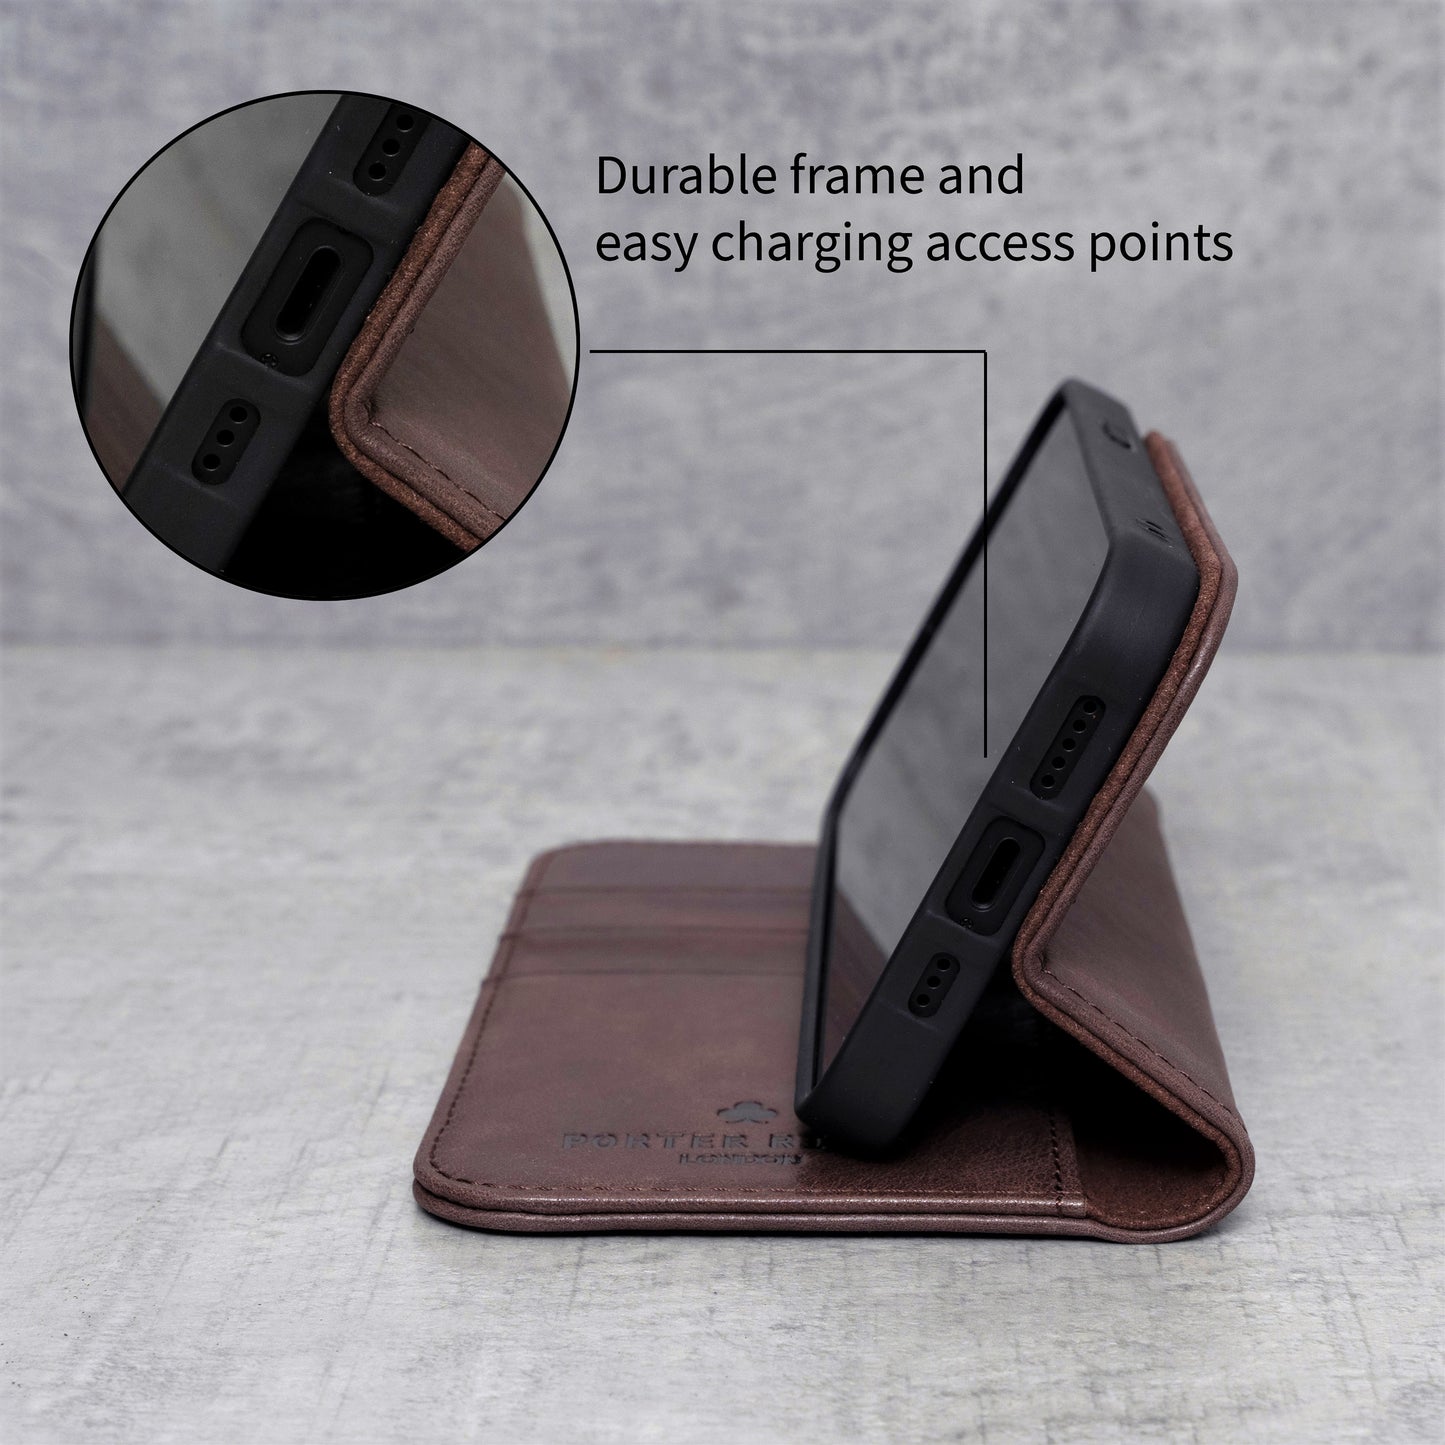 iPhone 13 Leather Case. Premium Slim Genuine Leather Stand Case/Cover/Wallet (Chocolate Brown)